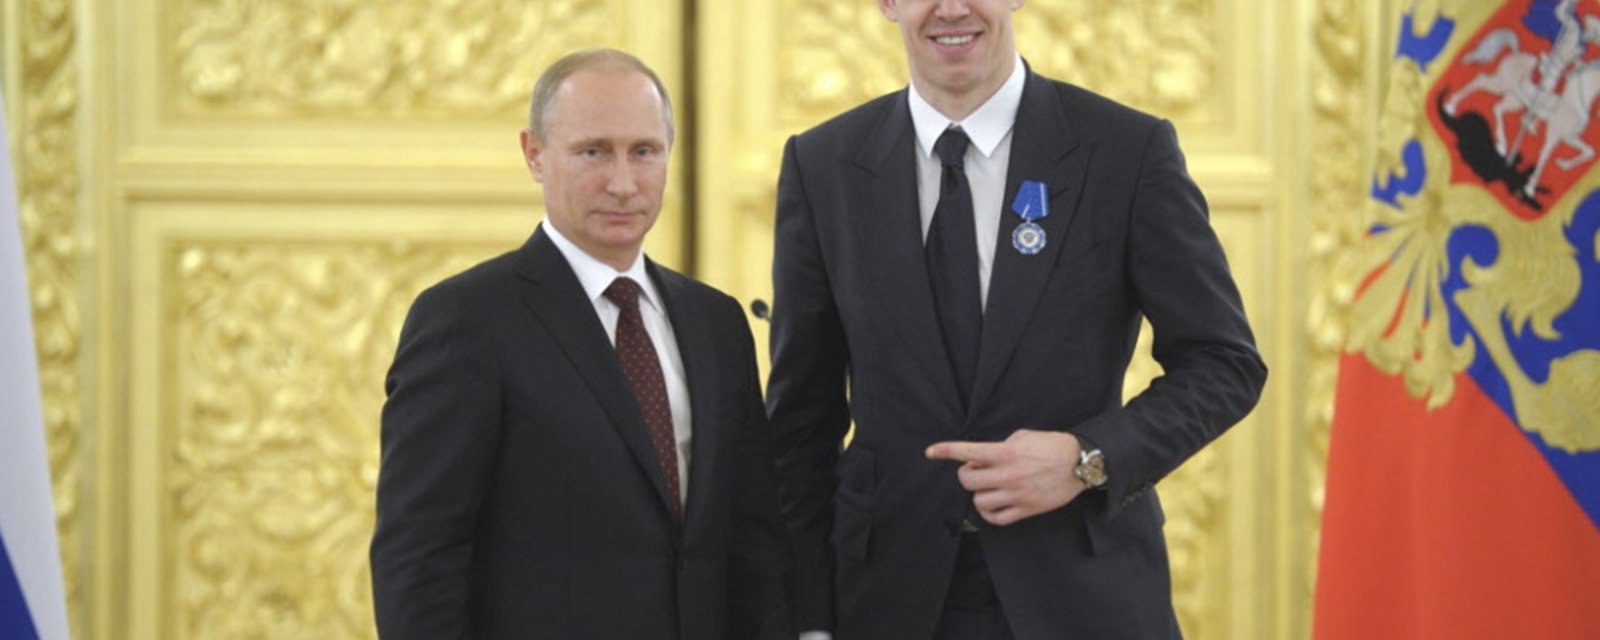 Report: Malkin joins Ovechkin in partnership with Putin